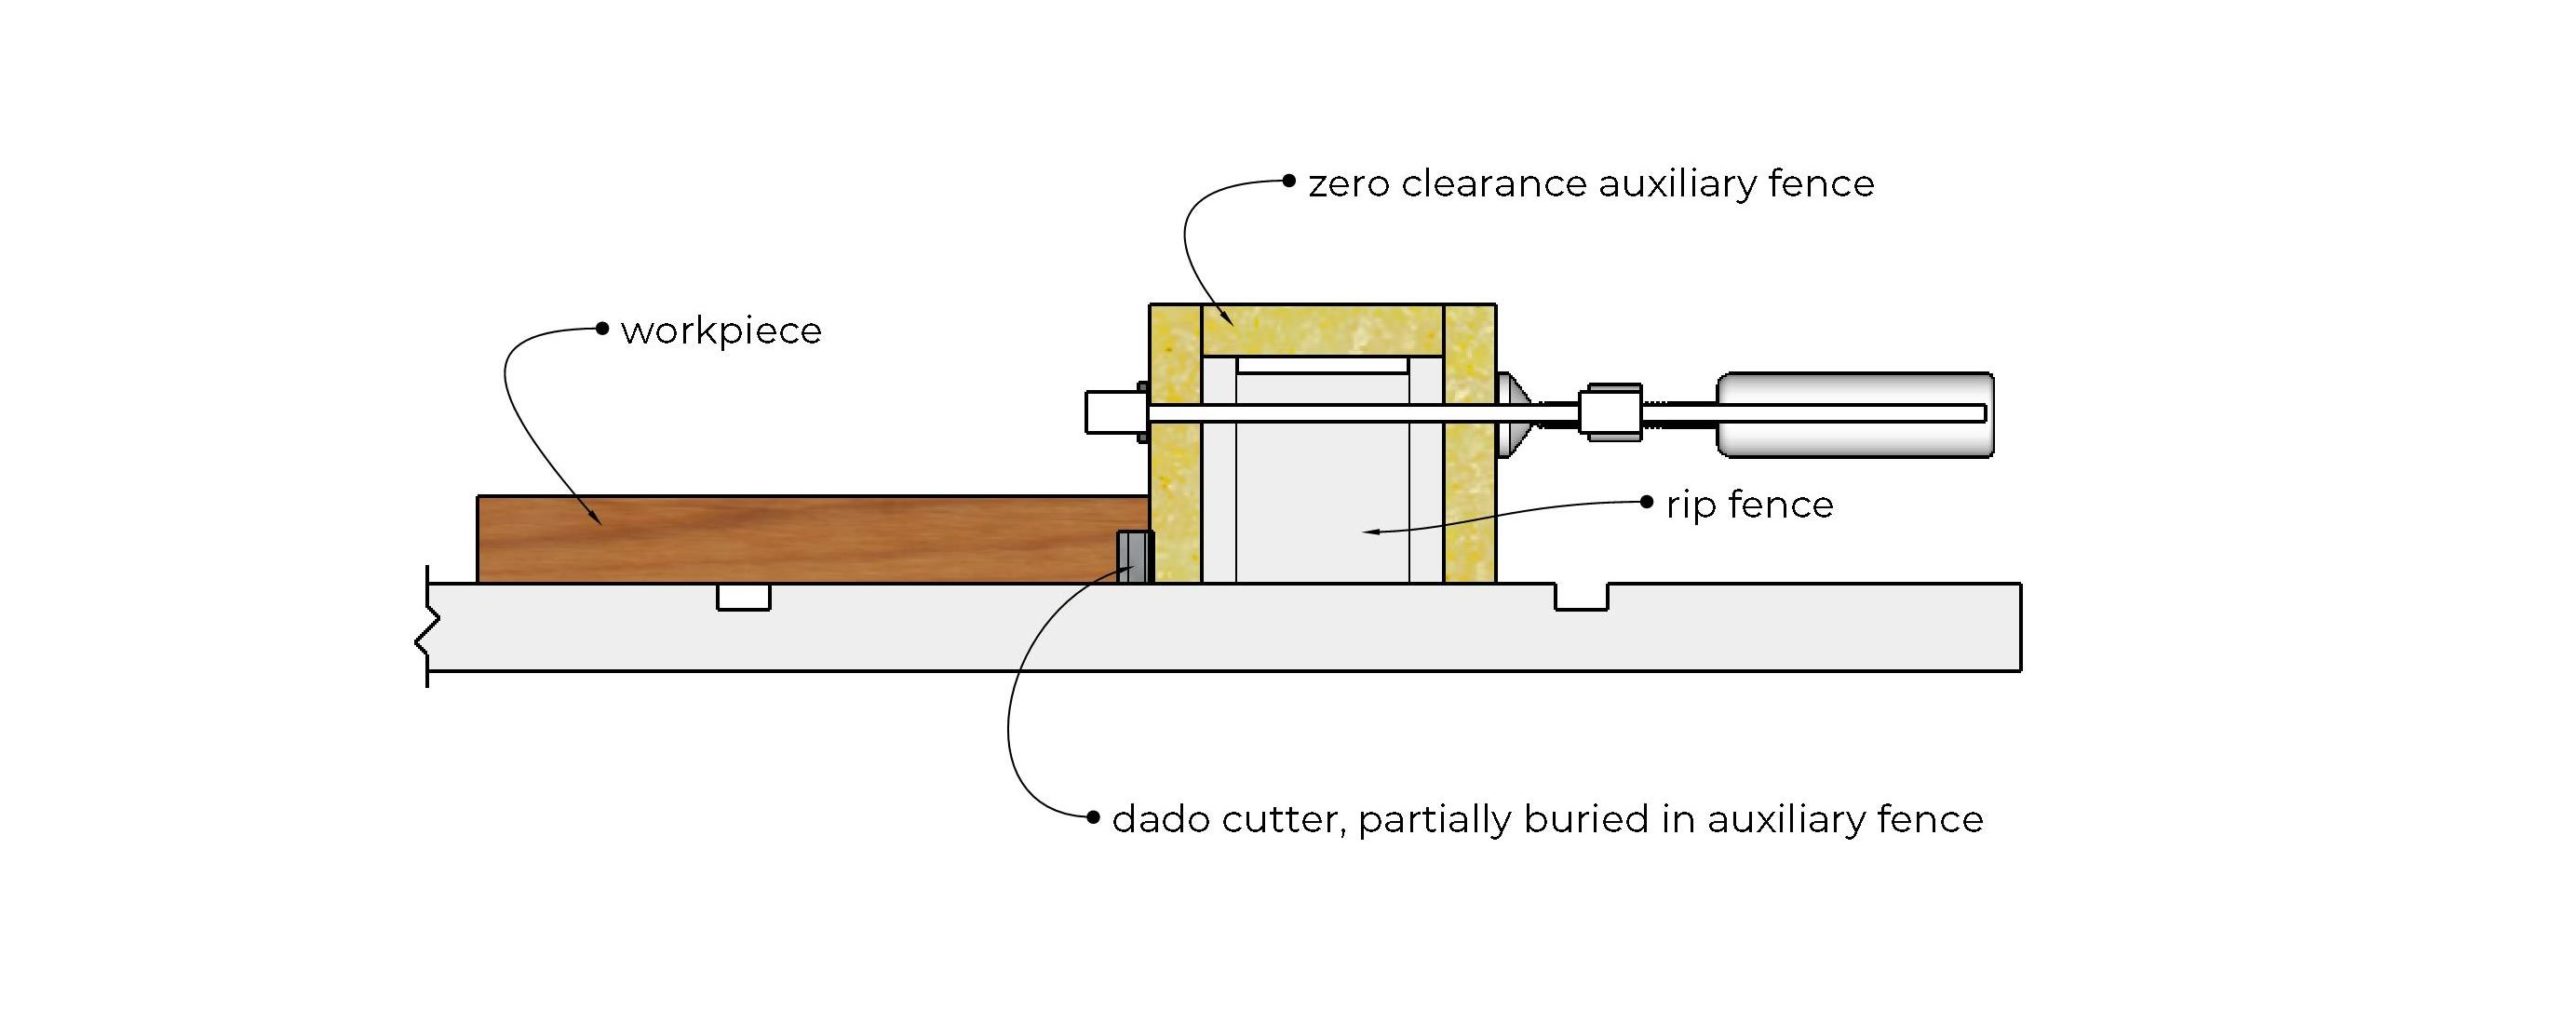 graphic showing the relative position of the workpiece, dado cutter, and box-style rip fence.